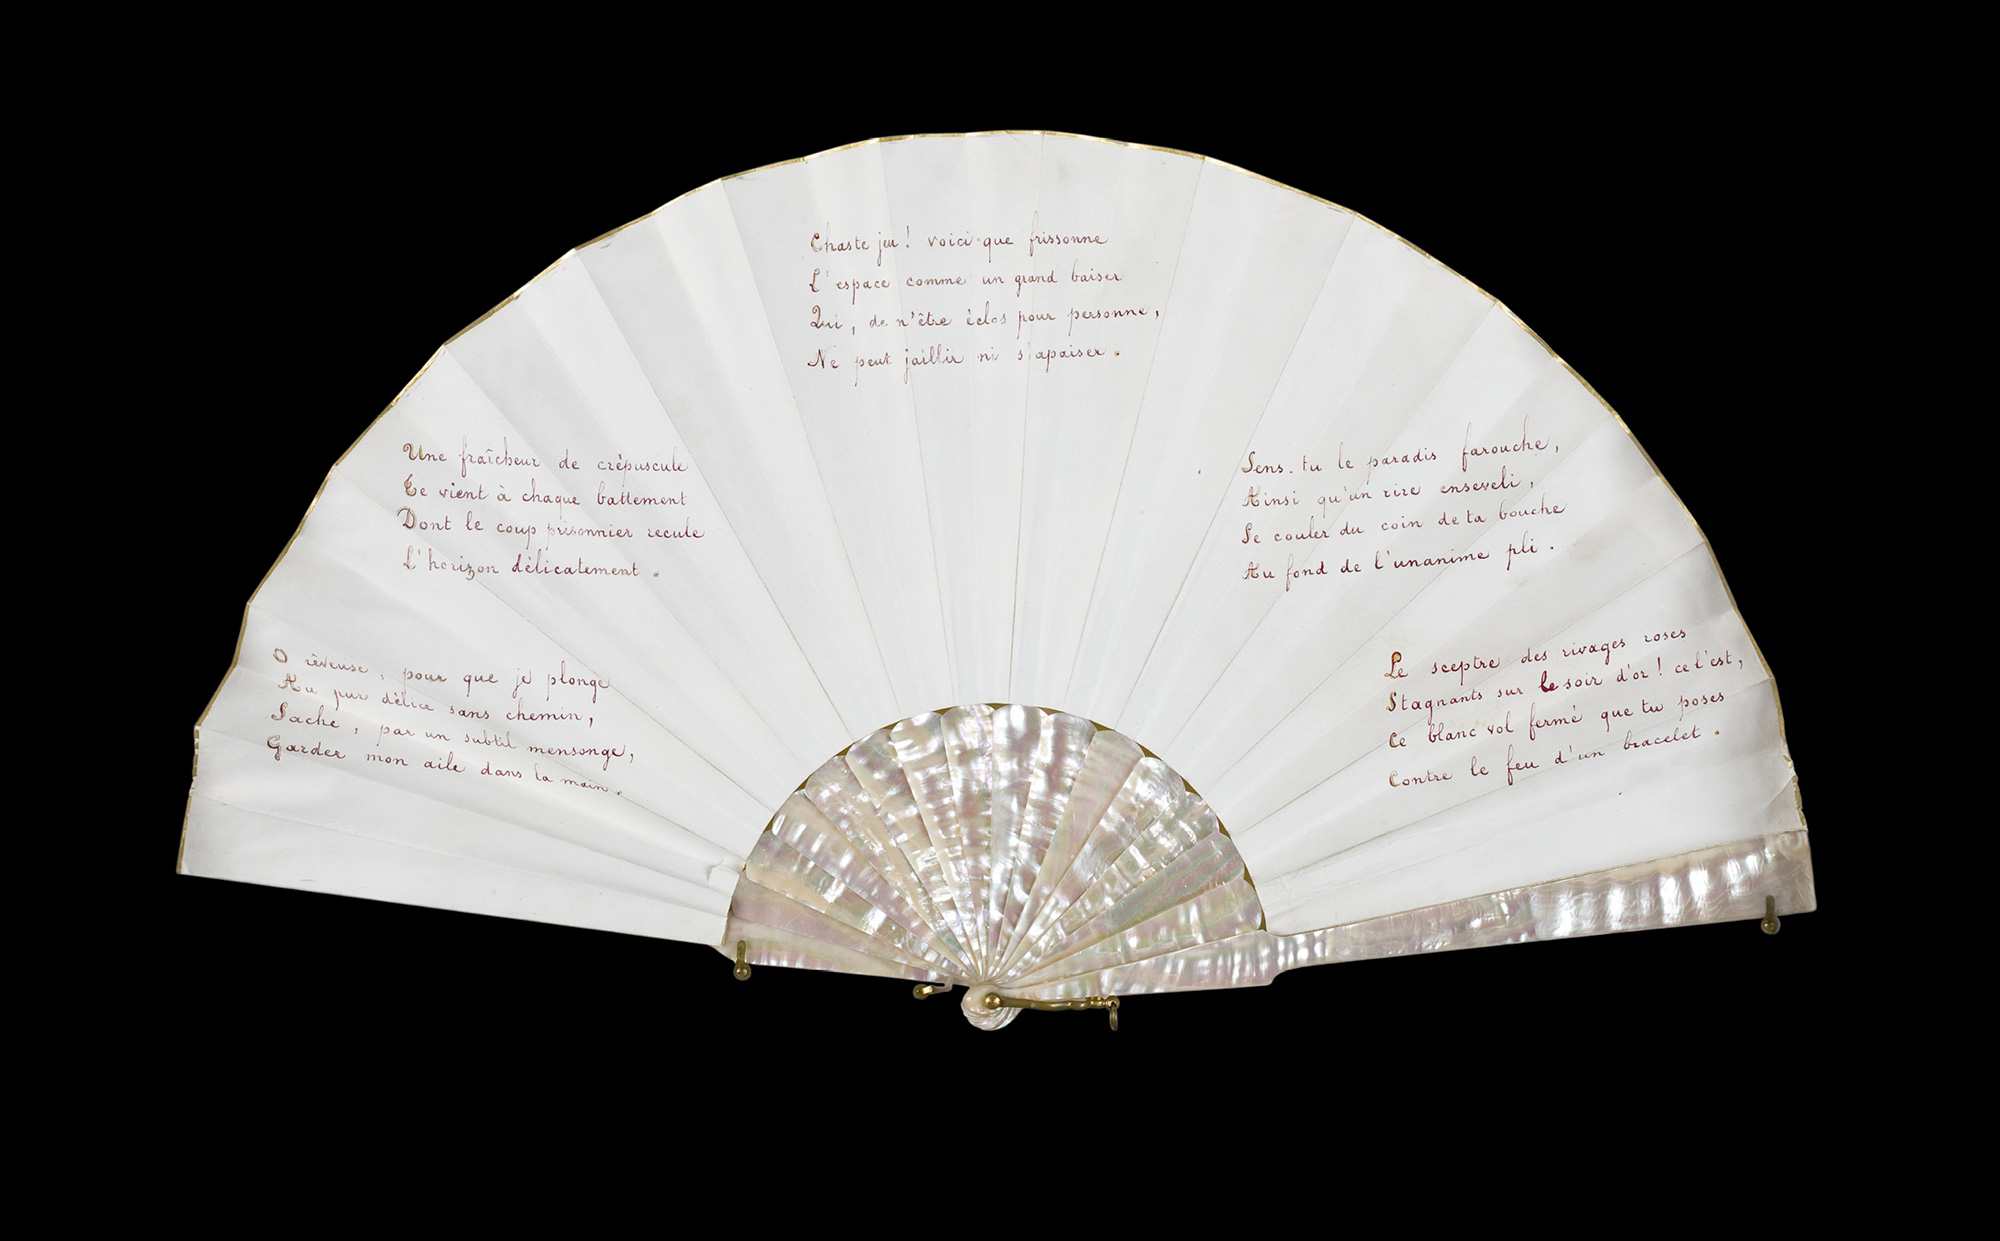 A photograph of “Miss Mallarmé’s other fan,” a poem written by Stéphane Mallarmé for his daughter Geneviève on a fan.